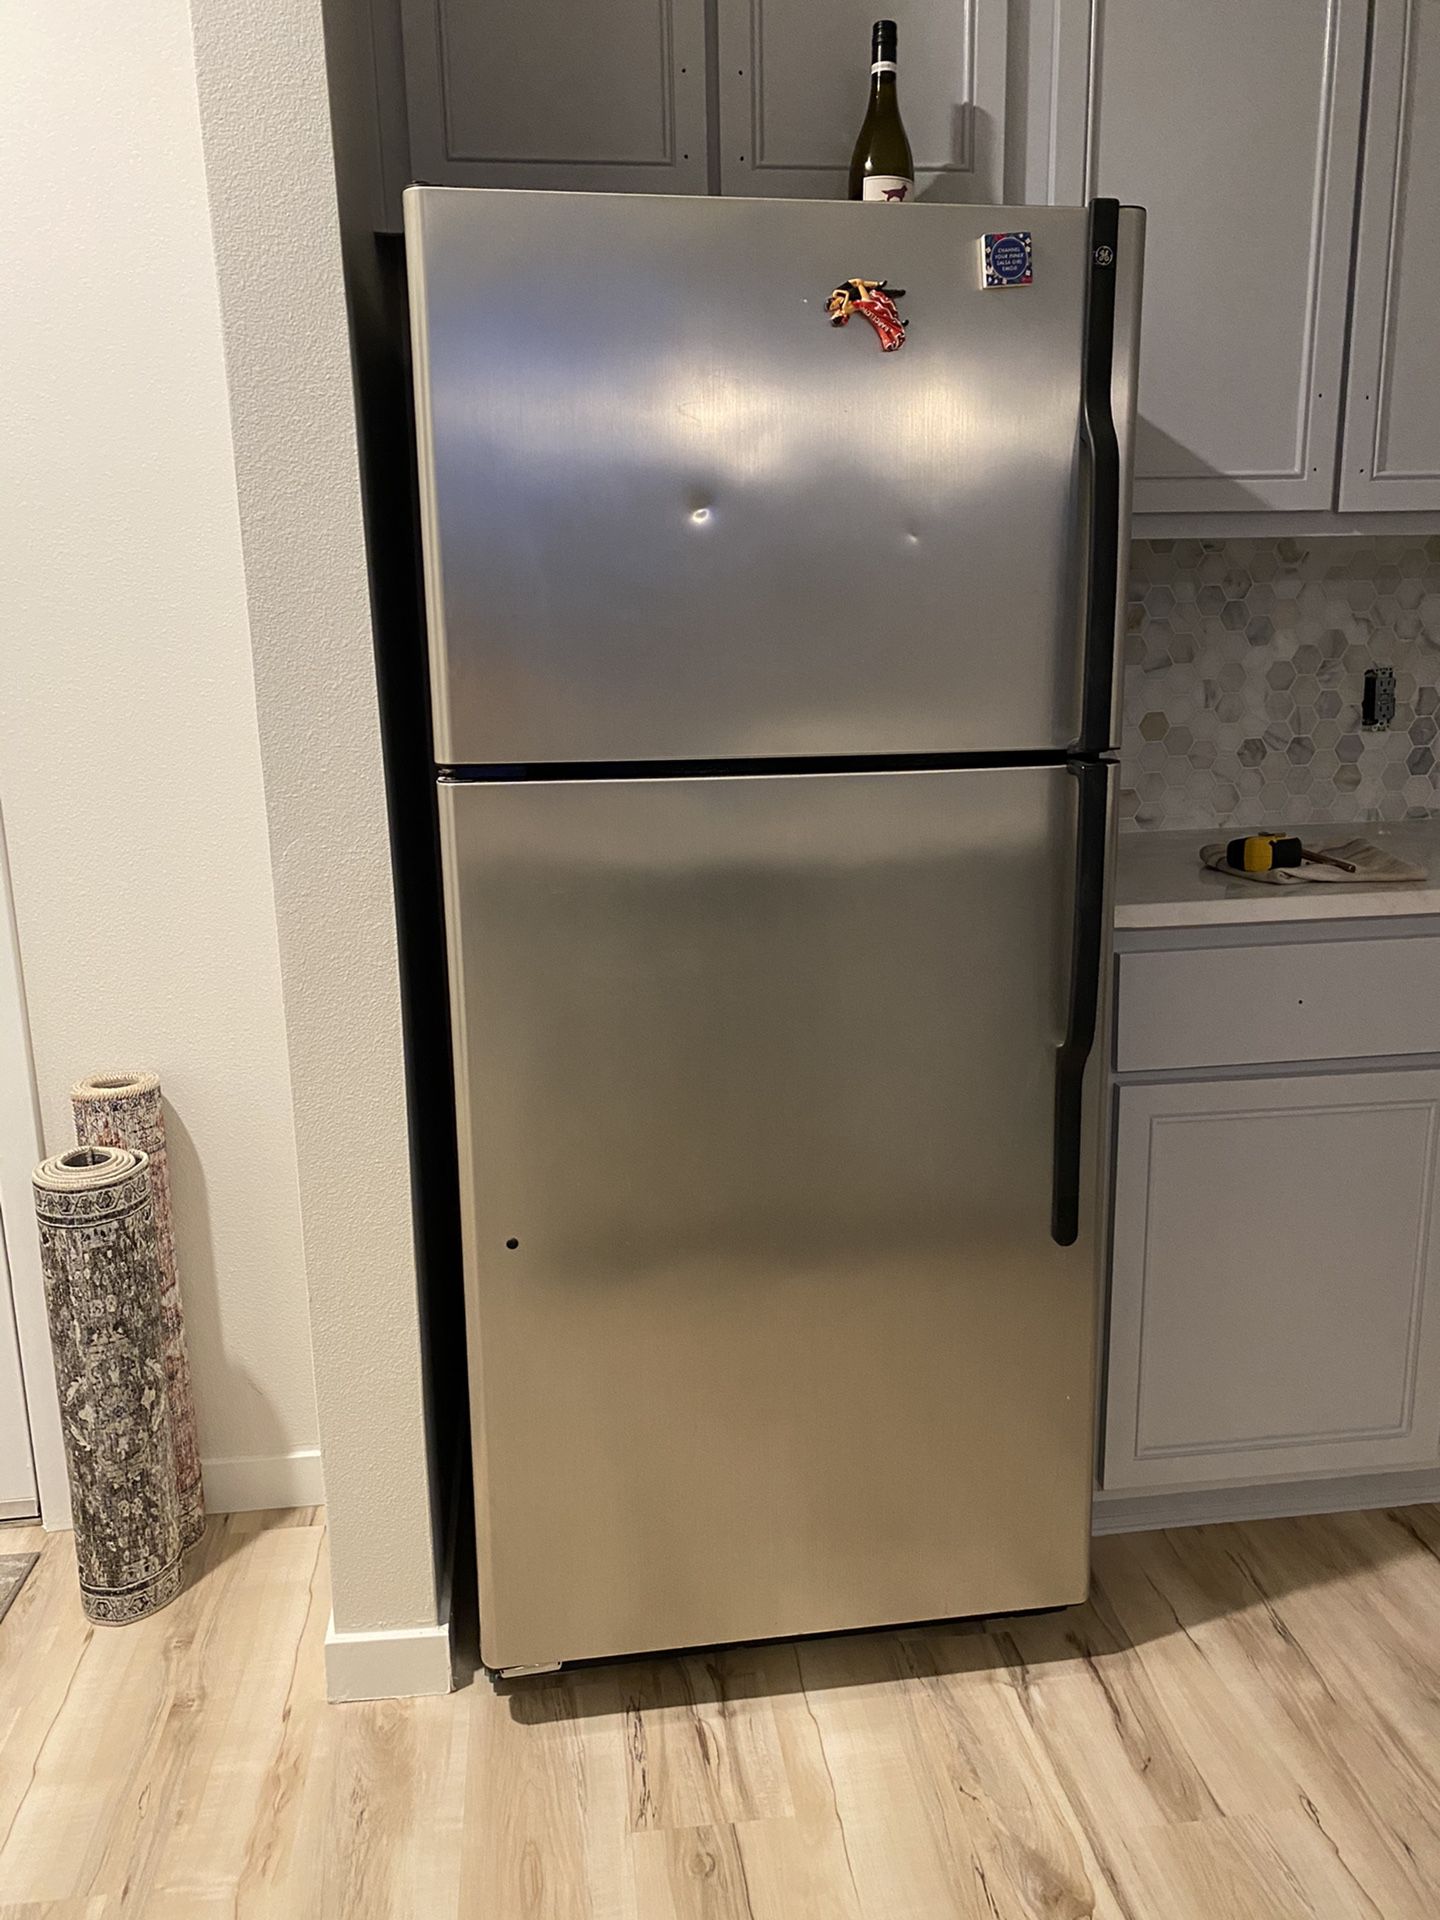 Brand Name (GE) refrigerator In great condition